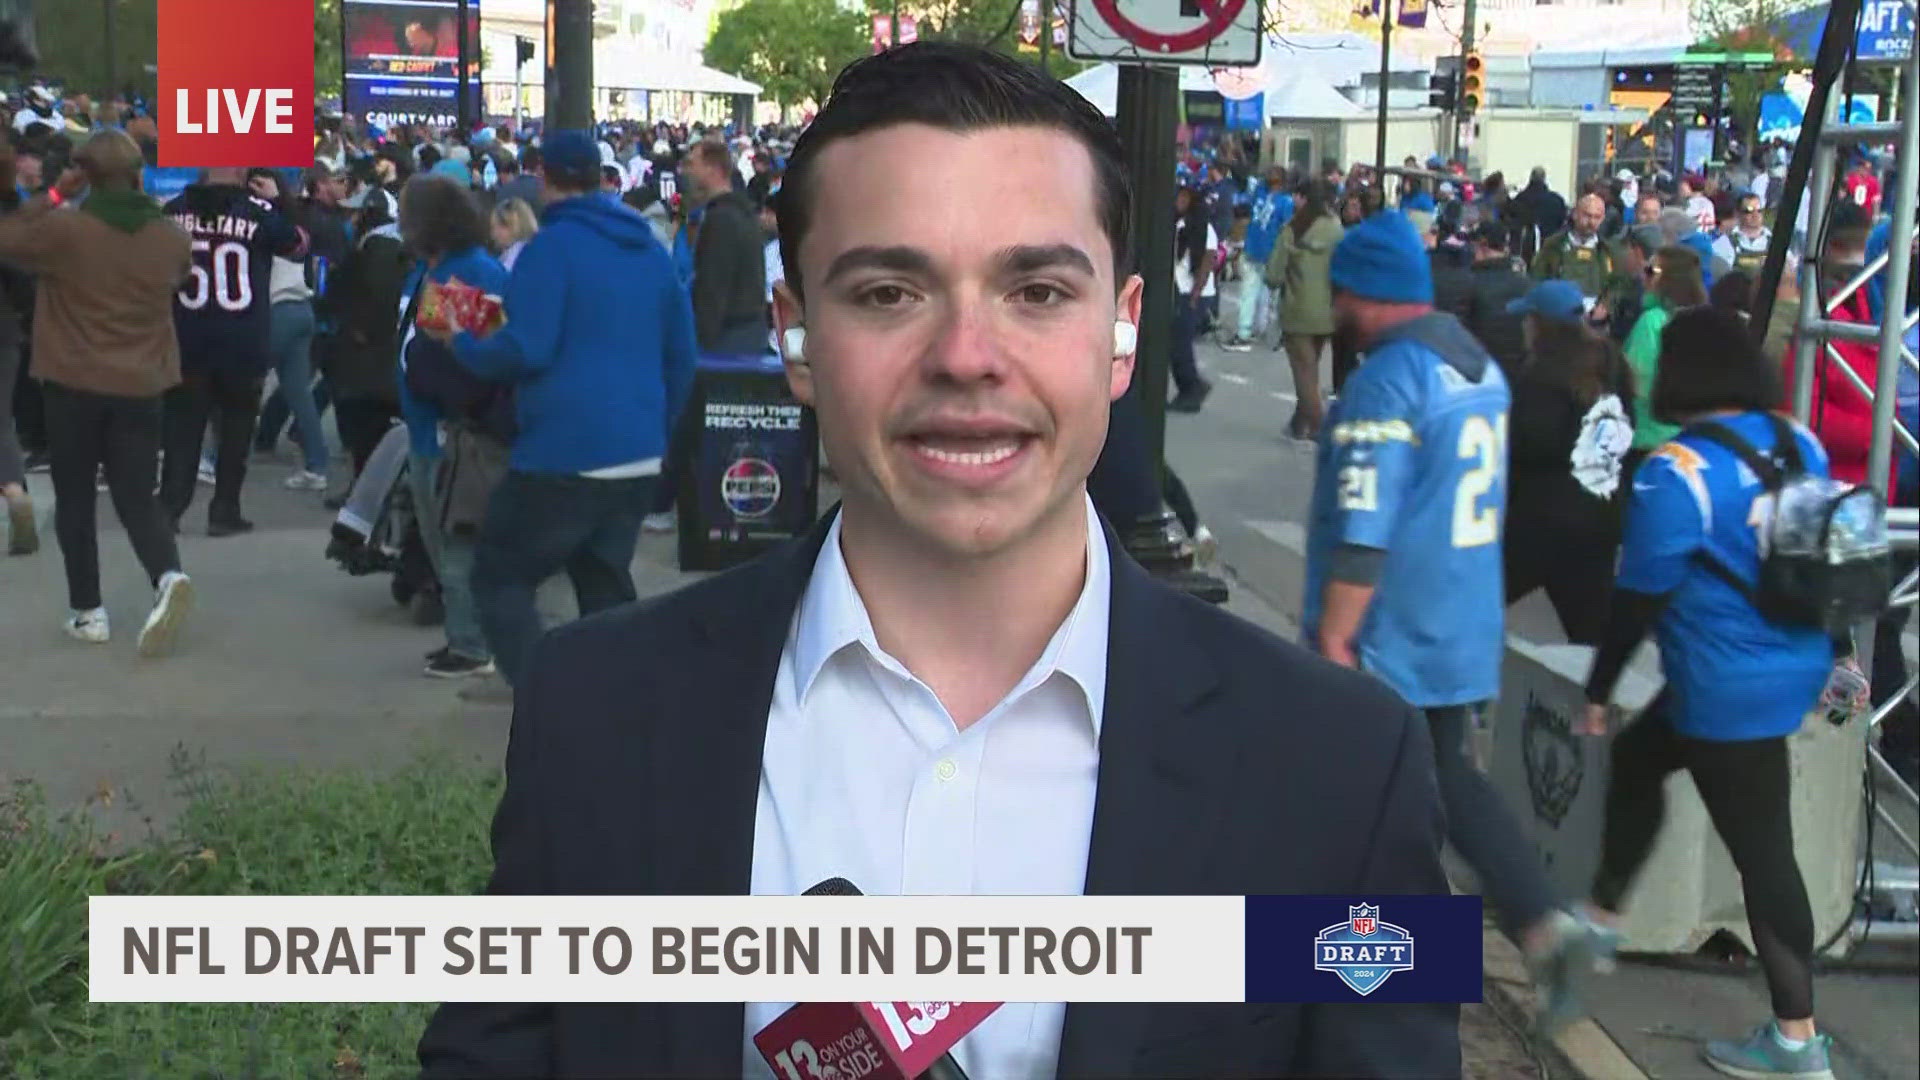 Lions fans are getting ready for the draft pick tonight!